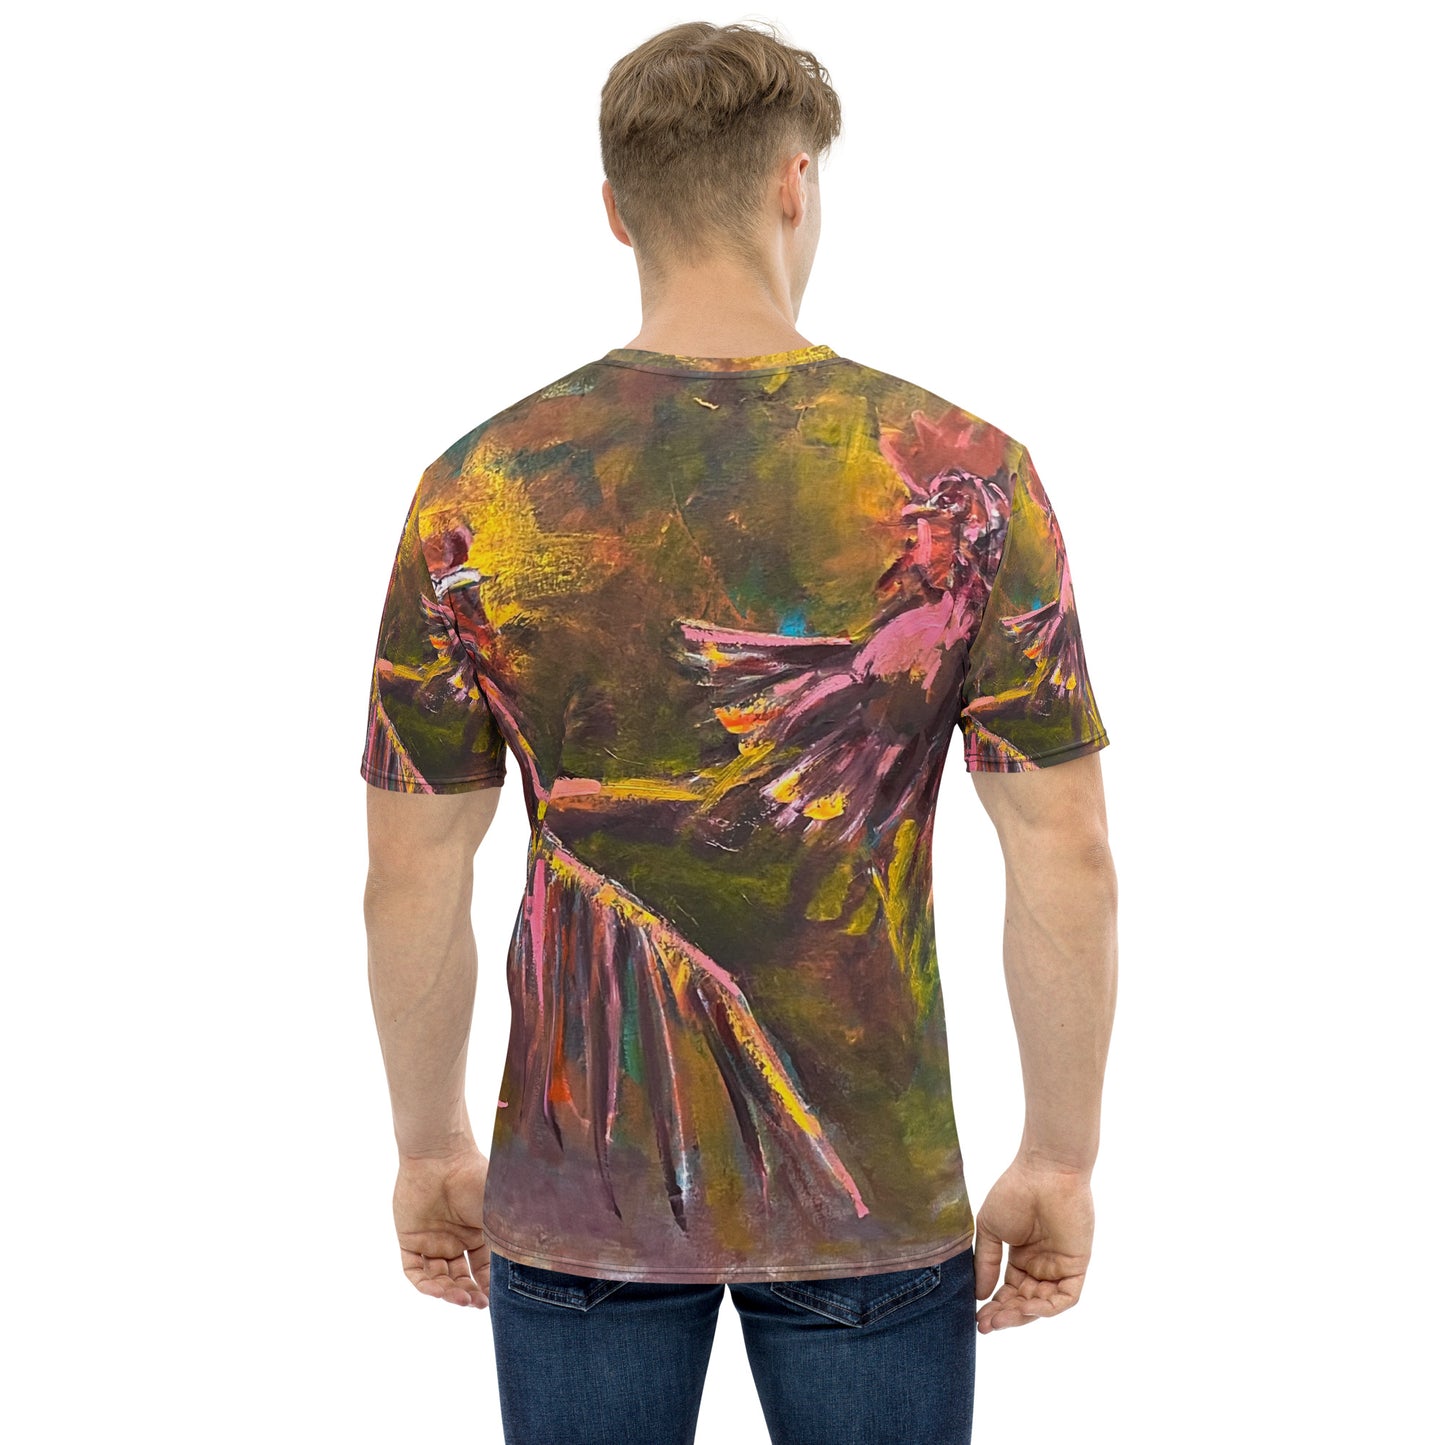 "Rooster Fight" by Guillo Perez 3 t-shirt